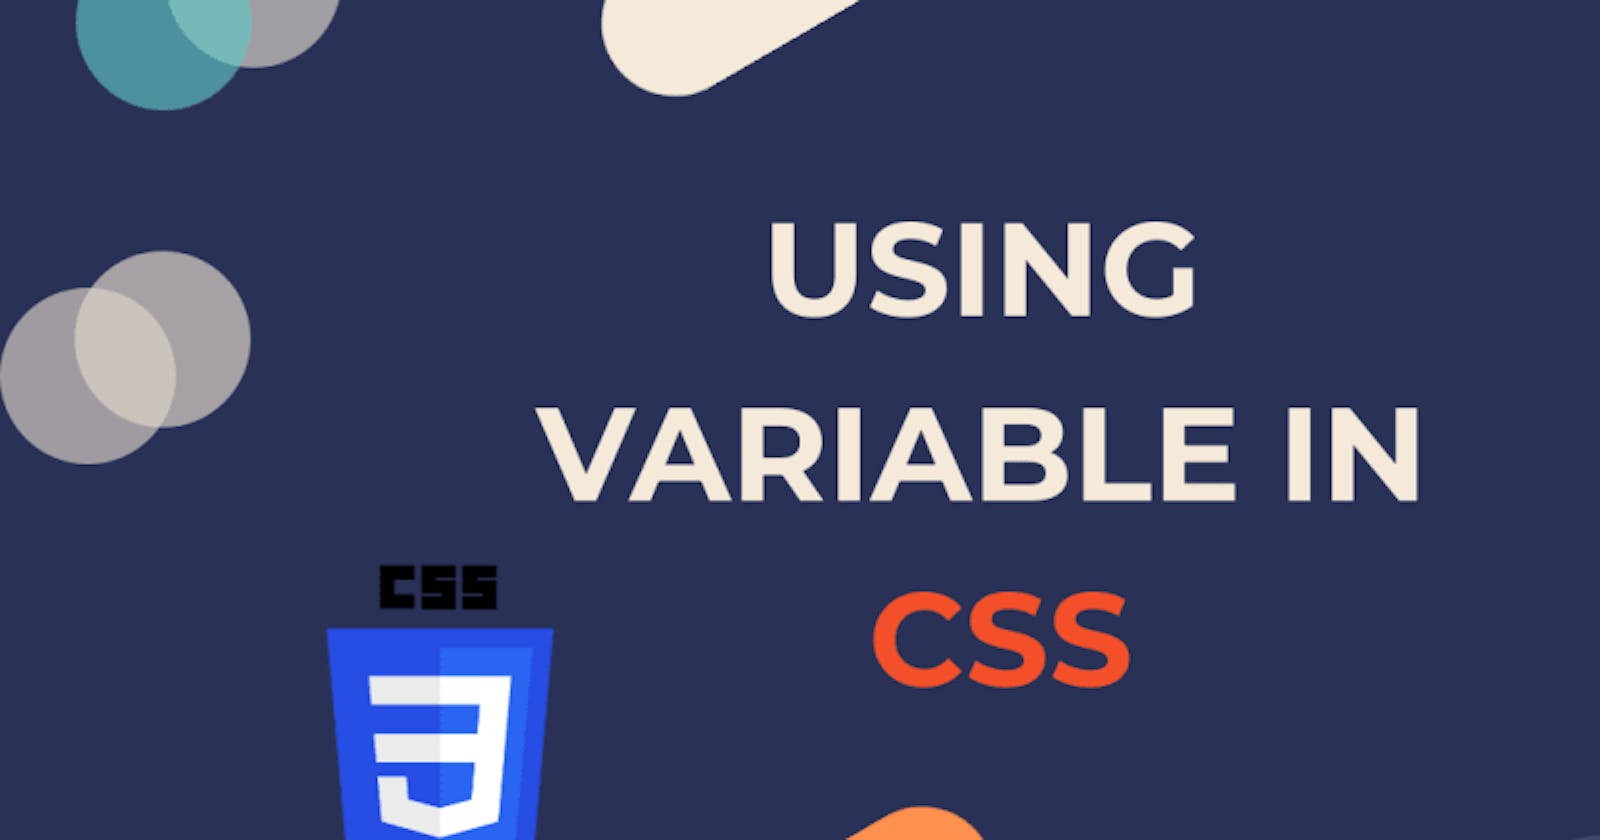 Defining Variable in CSS with var()